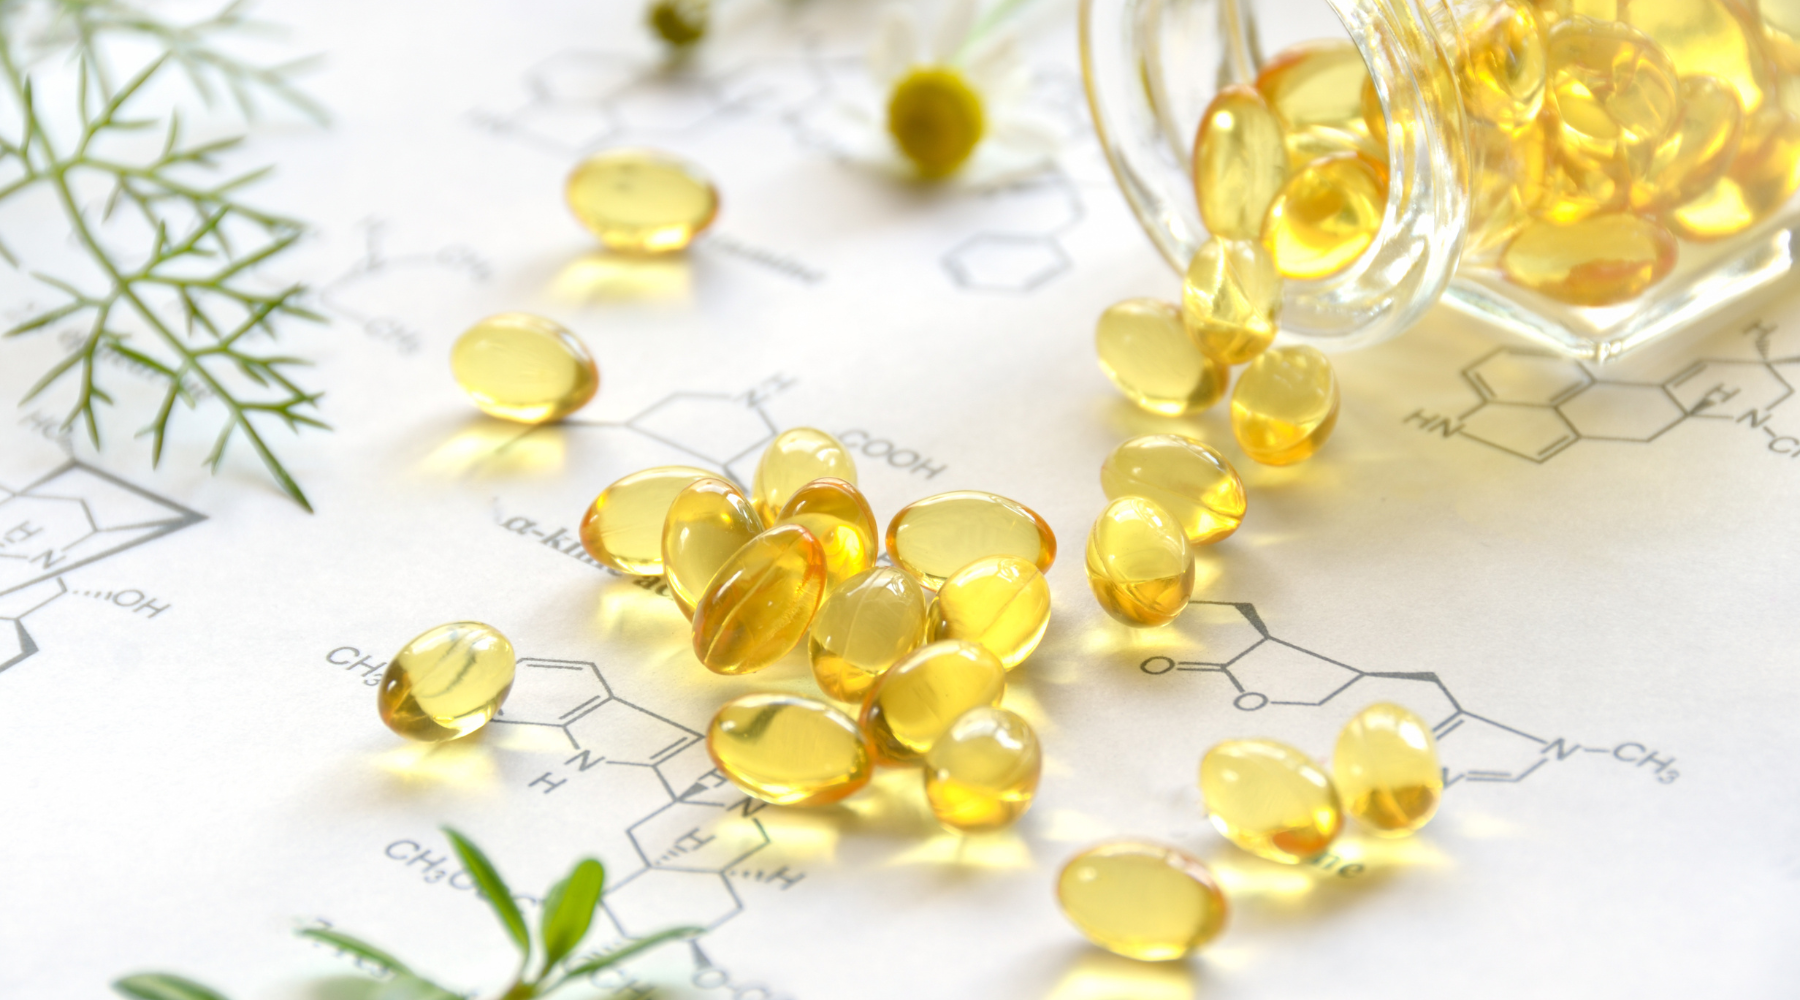 ARE SUPPLEMENTS NECESSARY OR SIMPLY A FAD?